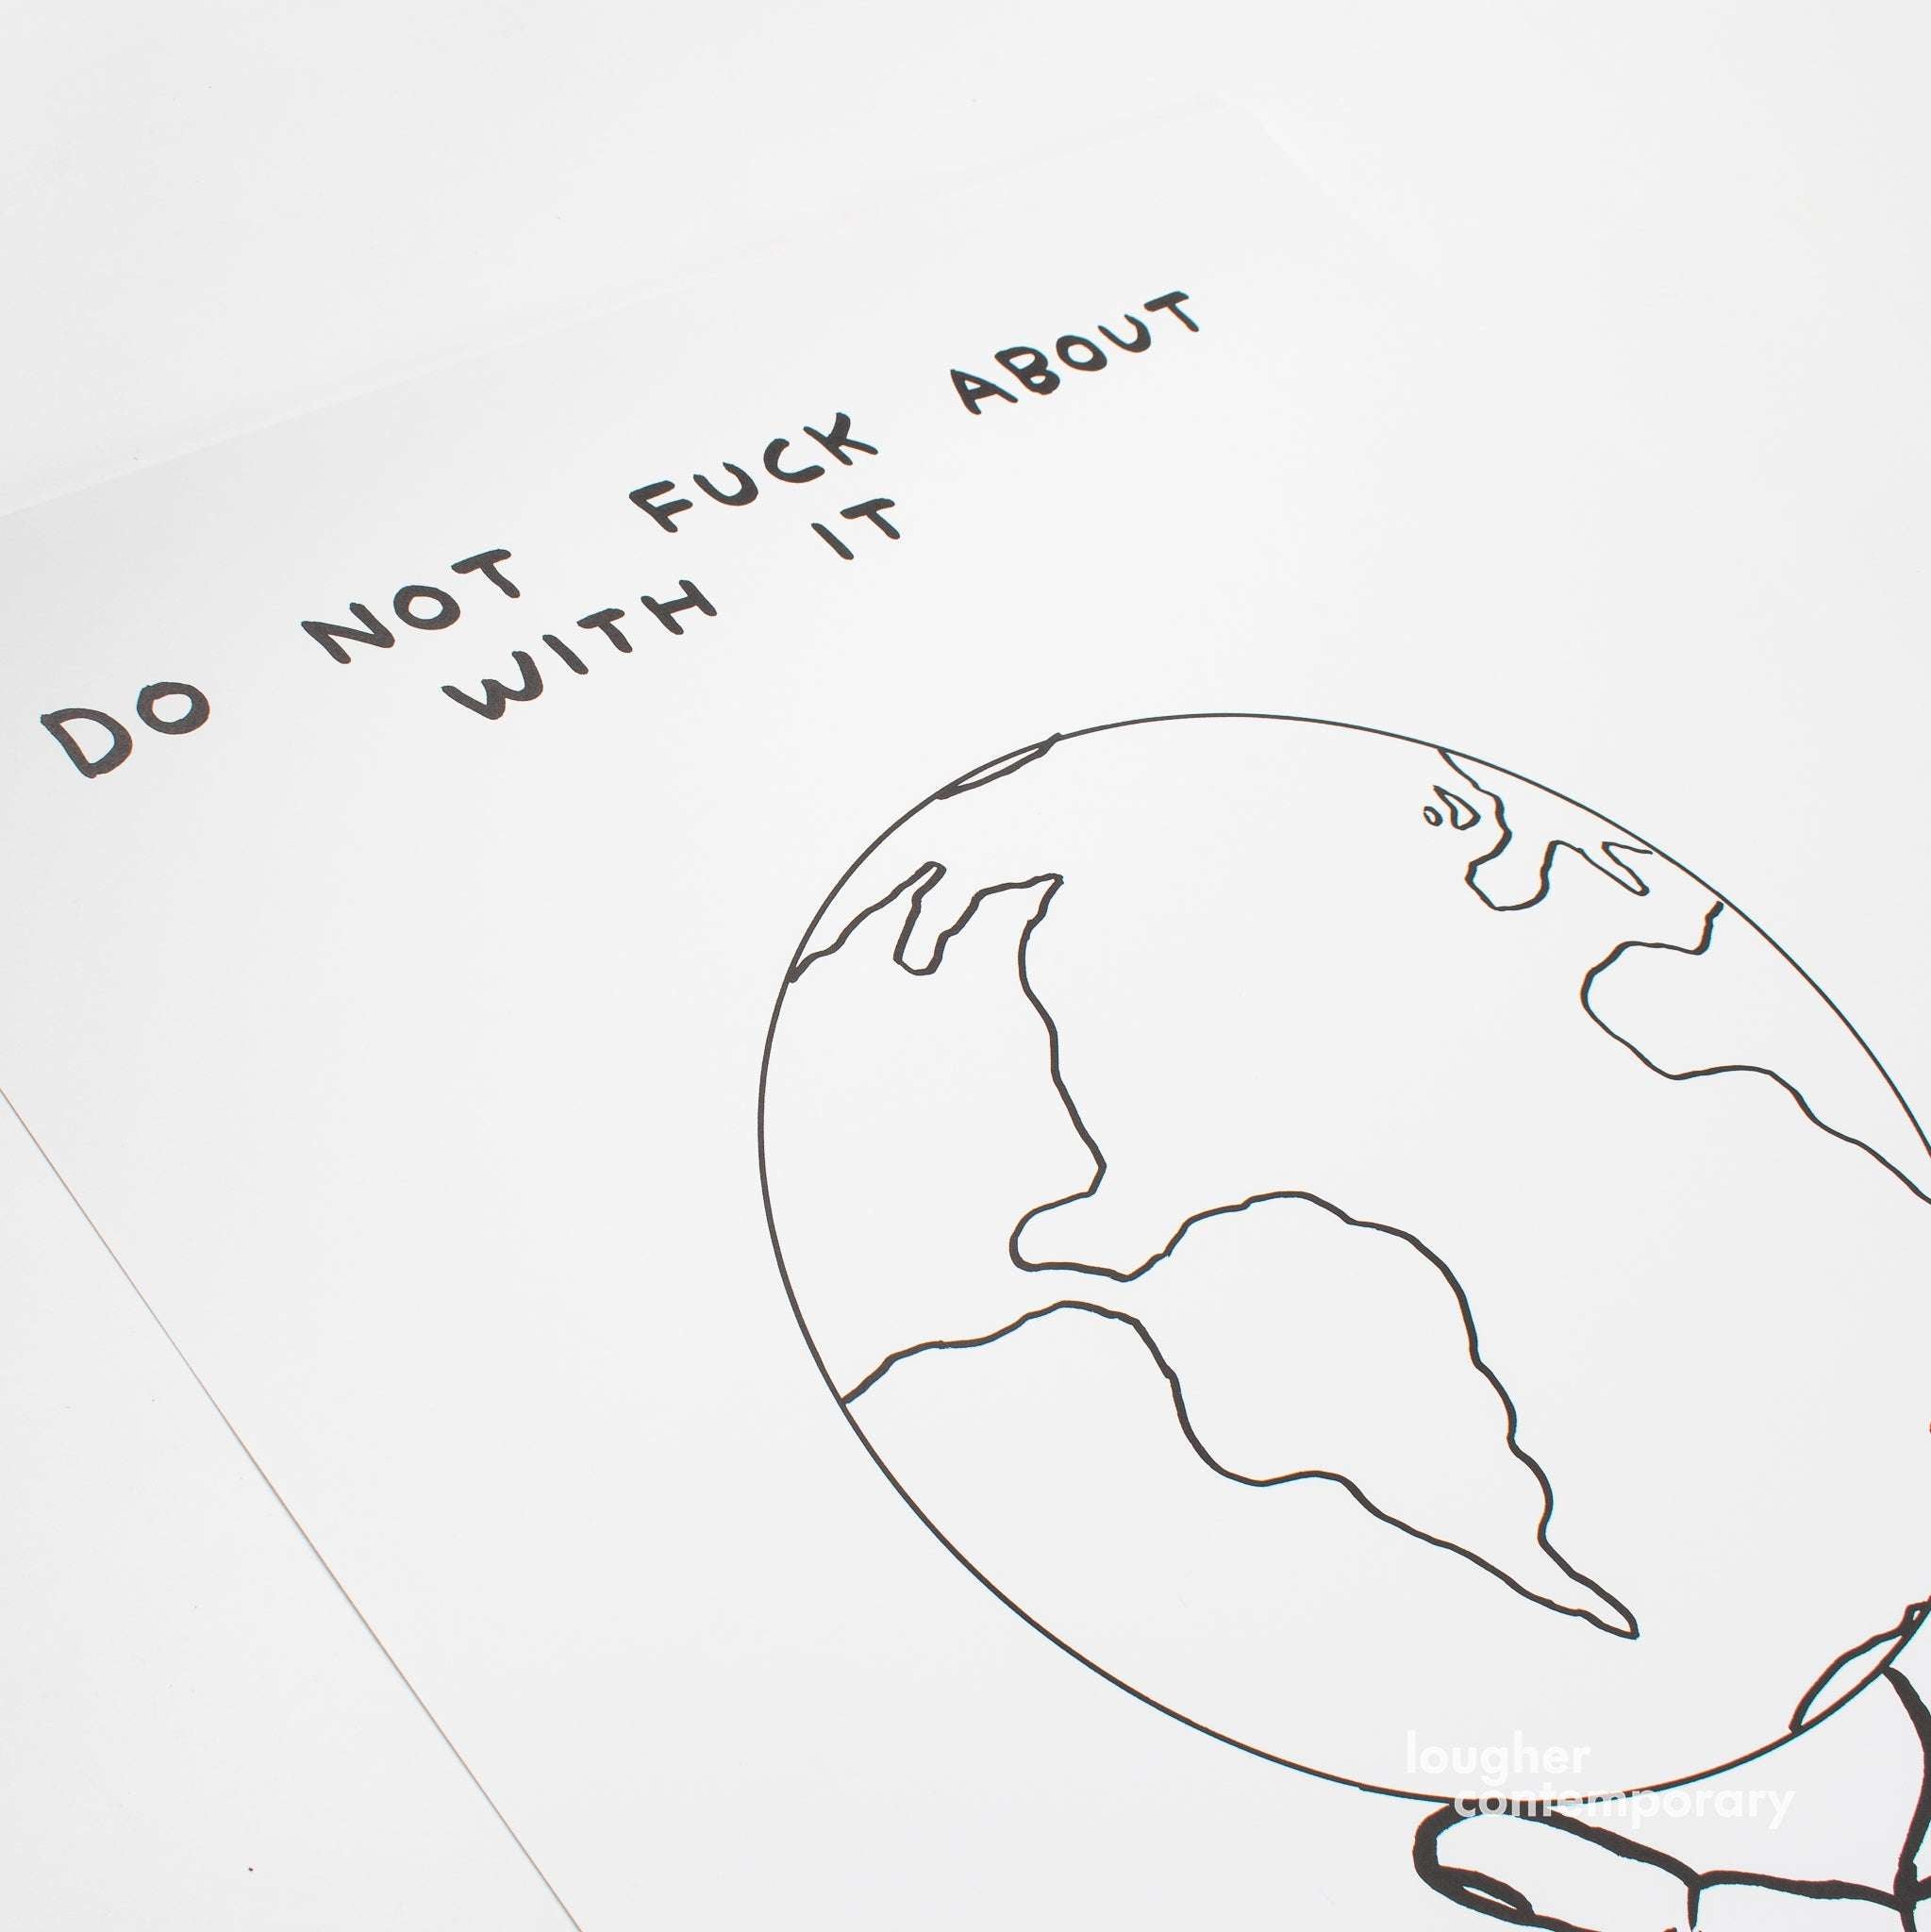 David Shrigley, Do Not Fuck About With It, 2021 For Sale - Lougher Contemporary